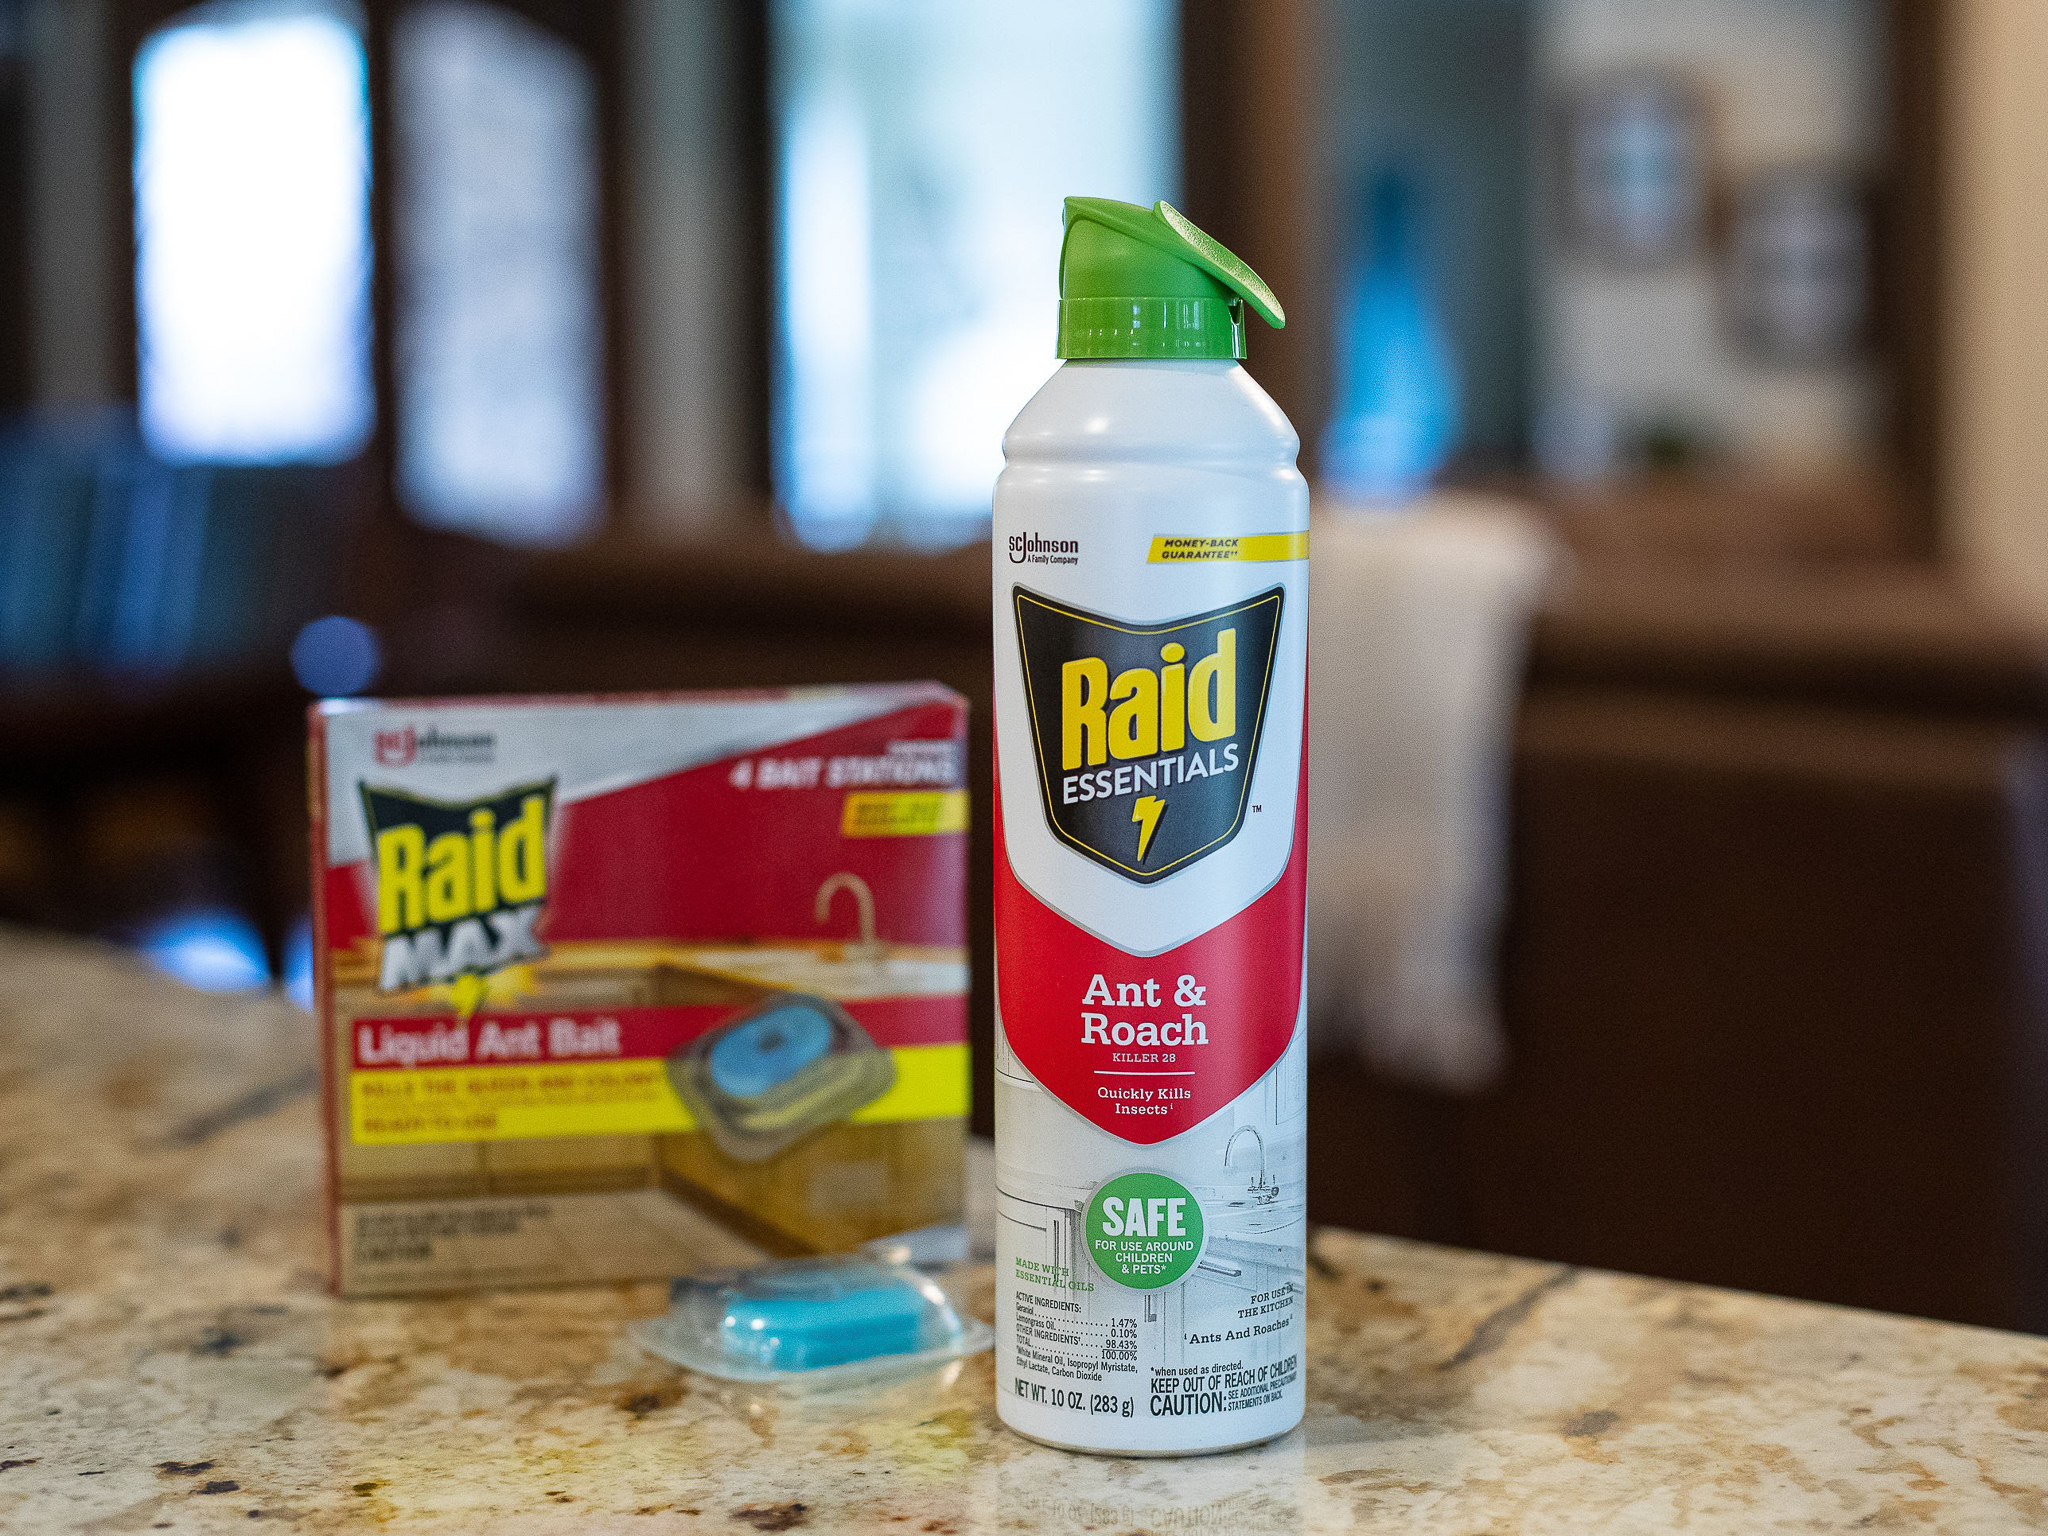 Grab Saving On NEW Raid® Essentials Ant & Roach Killer - Save Now At Publix on I Heart Publix